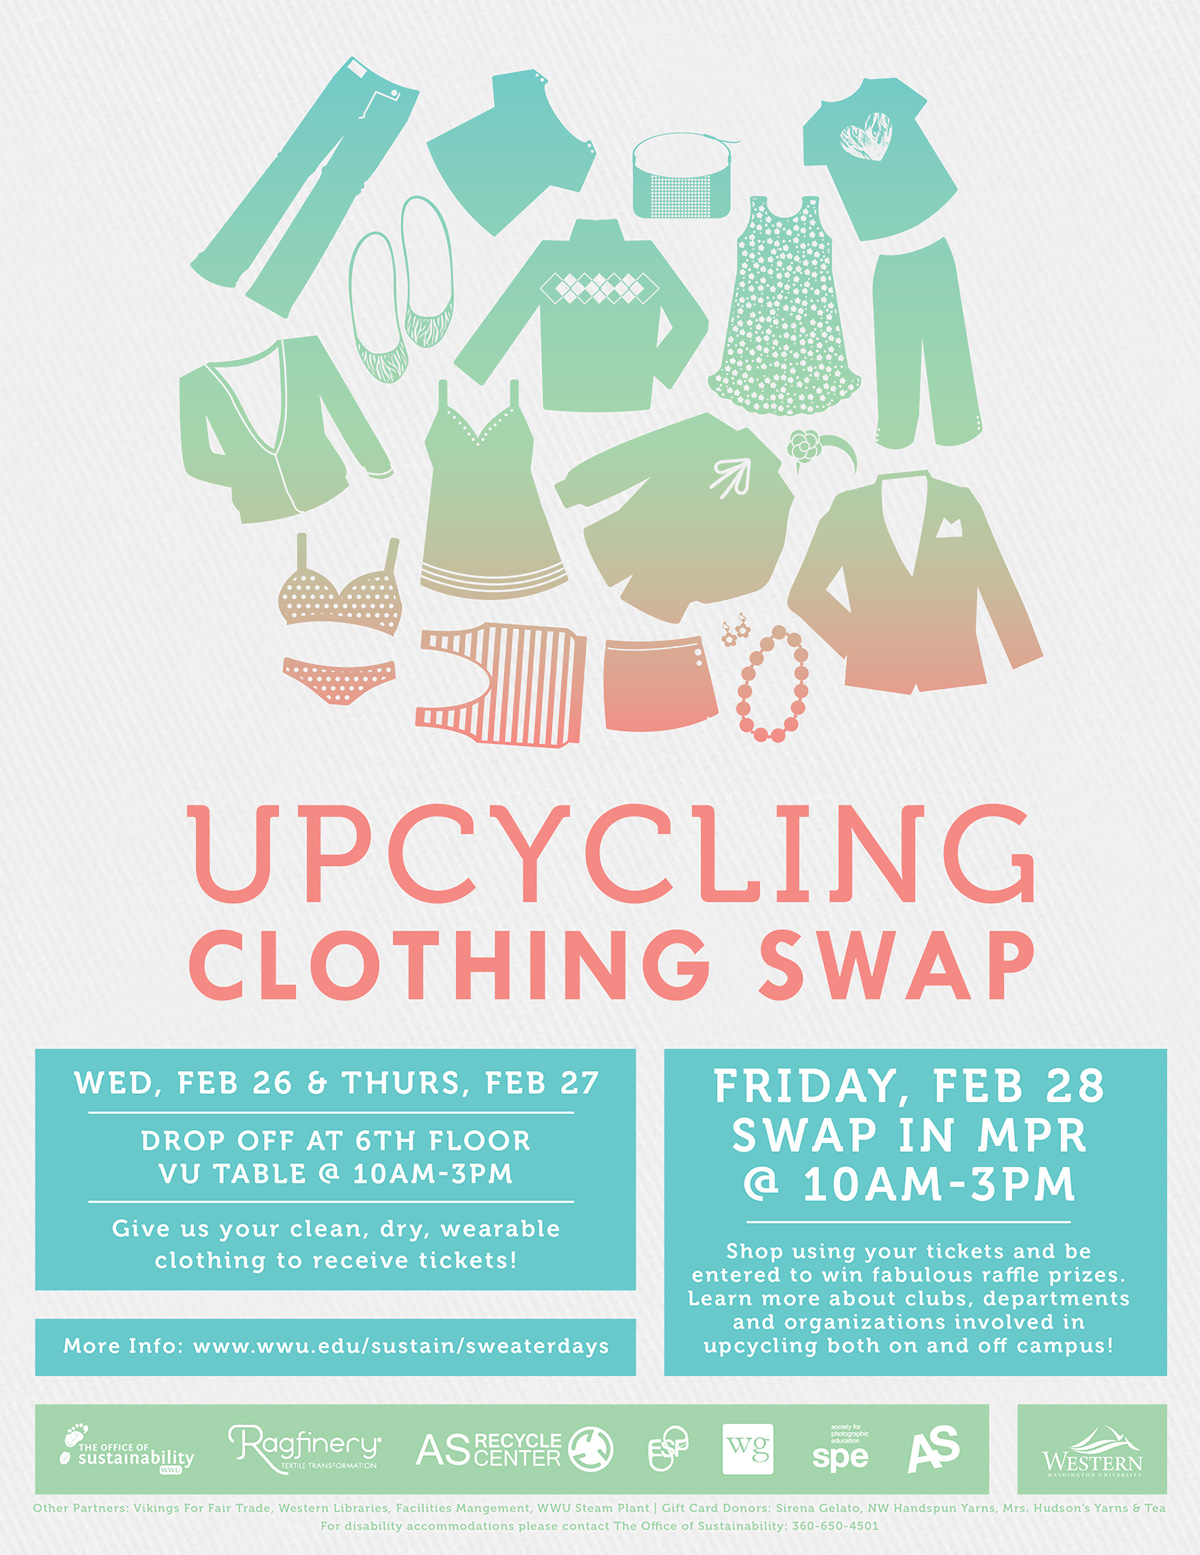 First Upcycling Clothing Swap set for Friday | Western Today